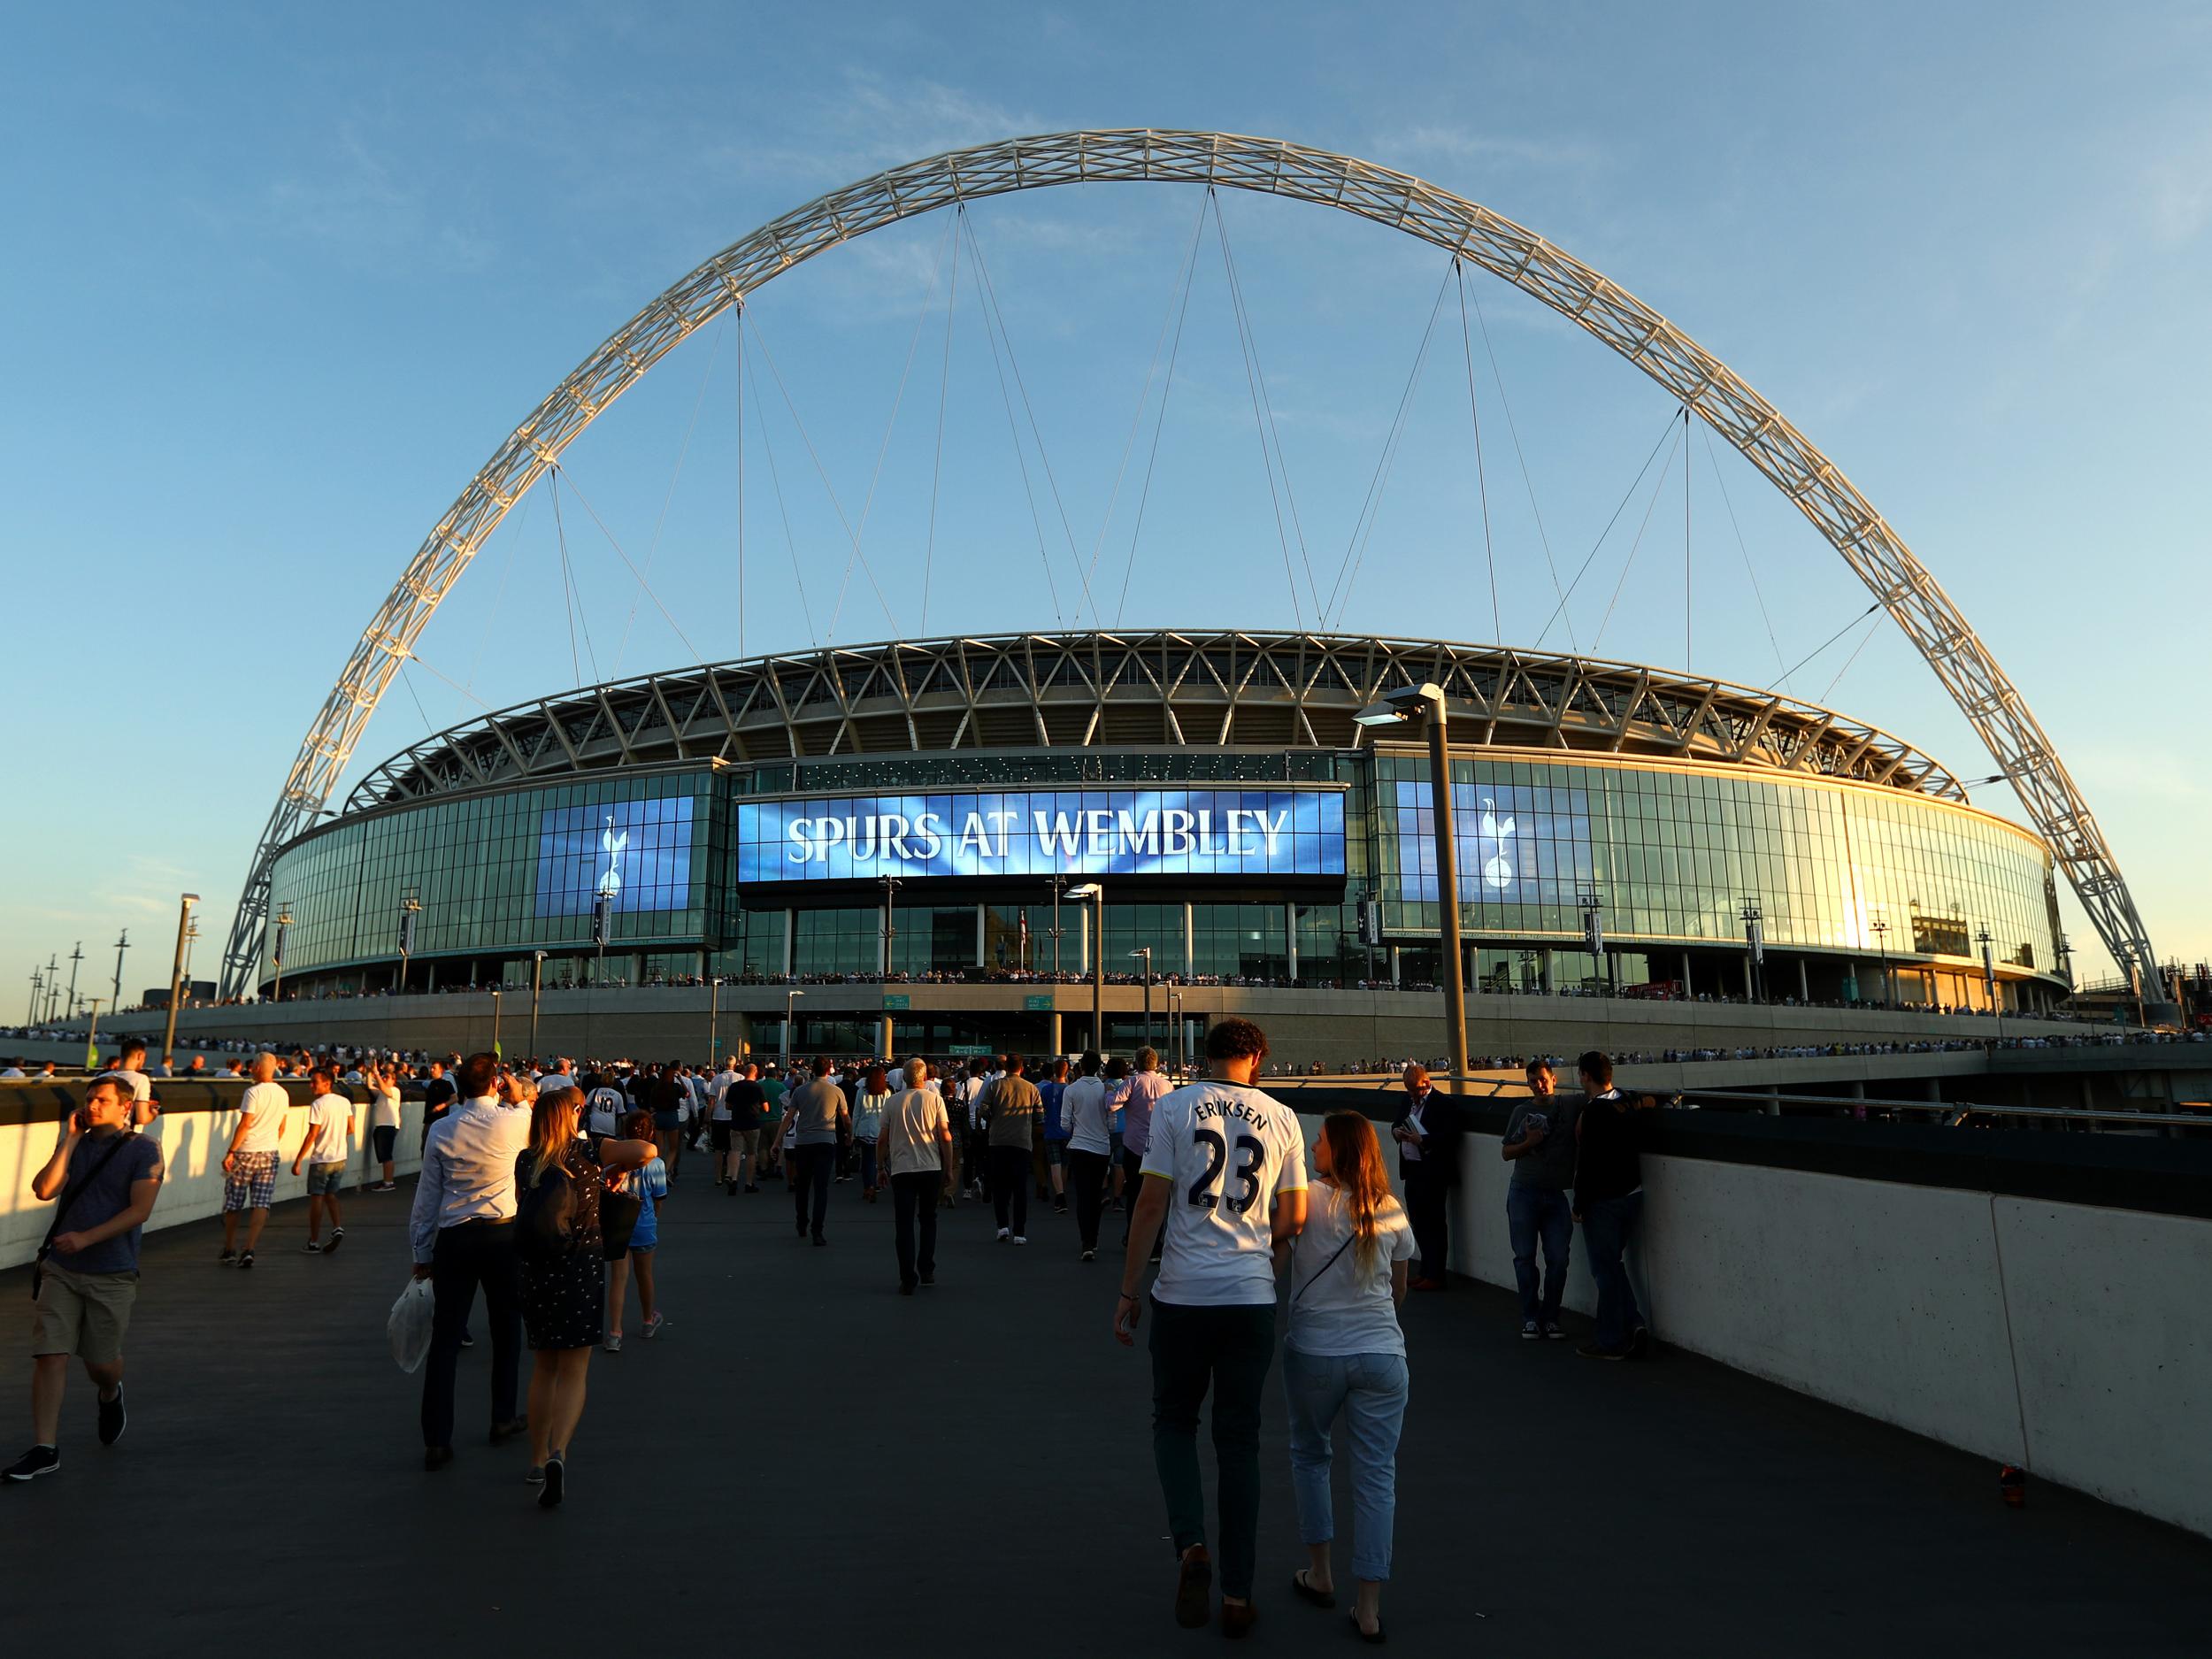 &#13;
Spurs have a poor record at Wembley &#13;